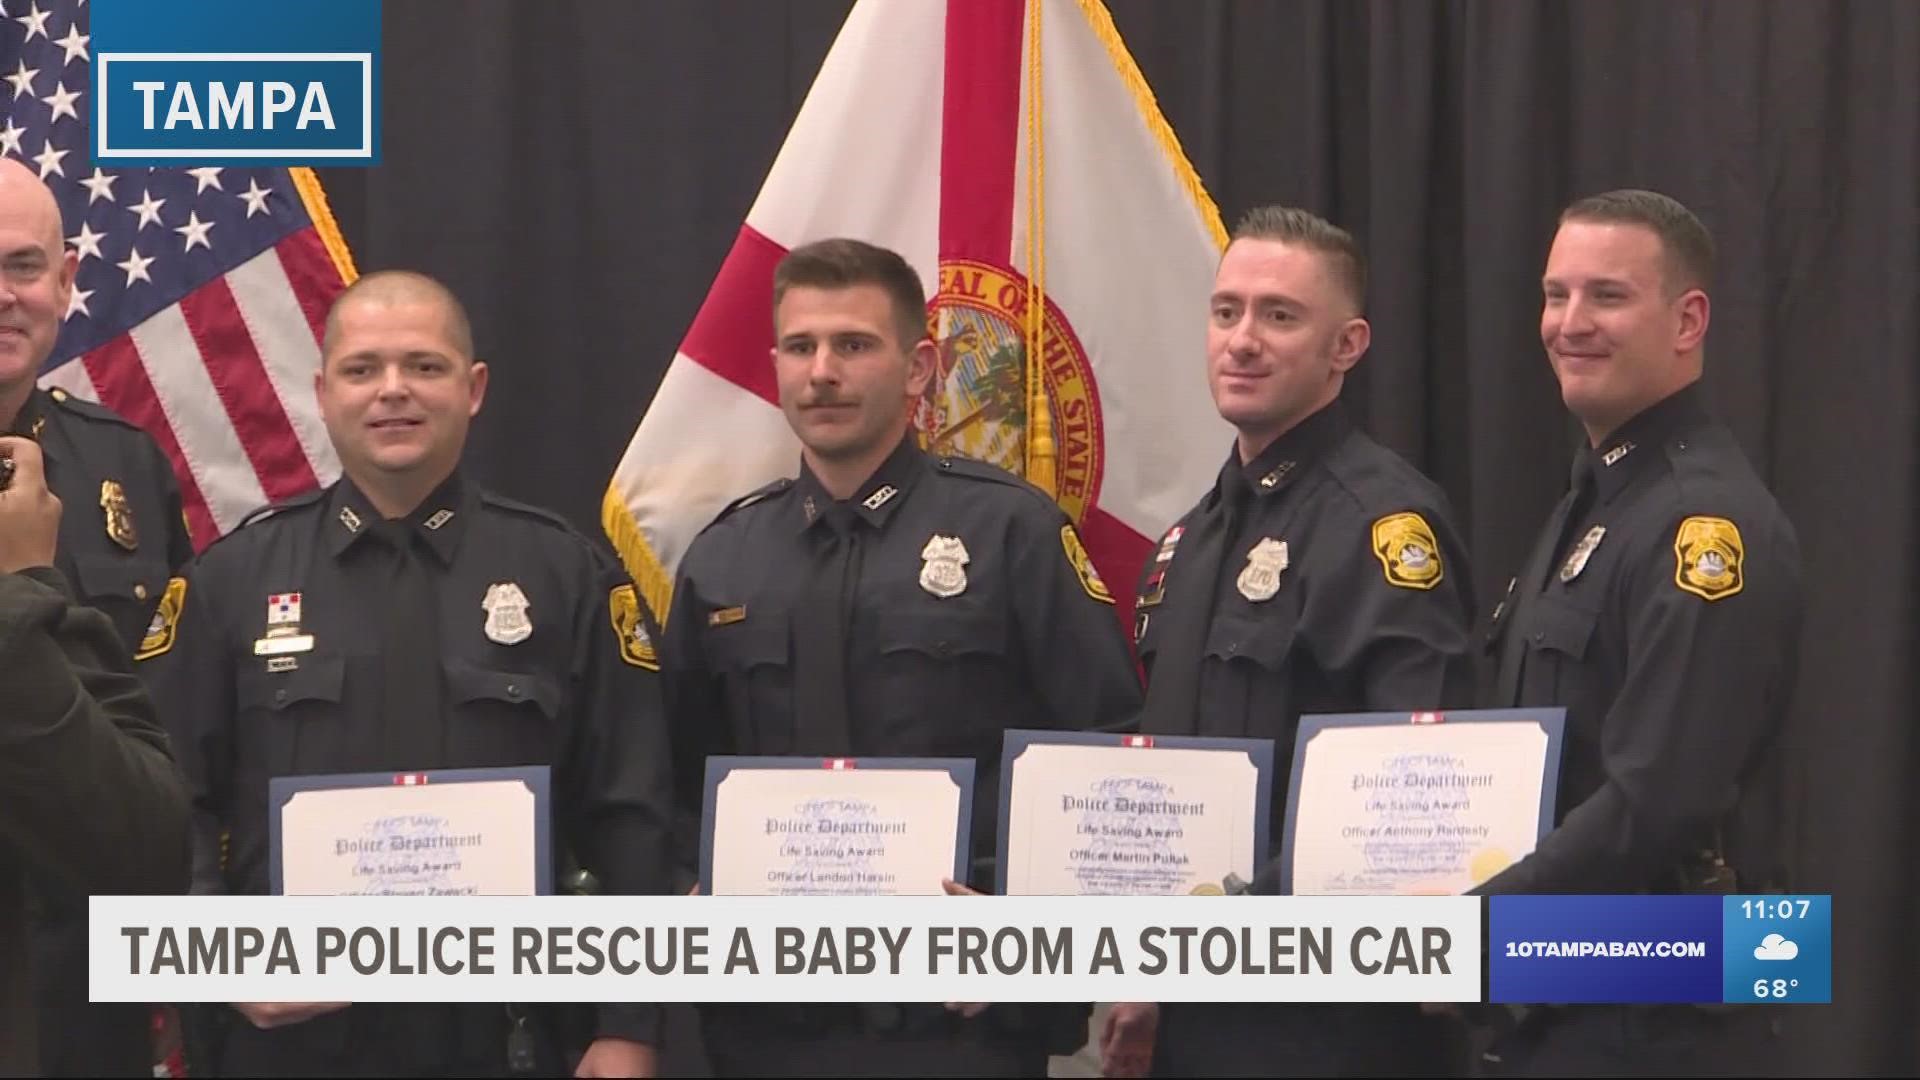 The baby was overheated, but the officers were able to use a cool compress and give her tiny bits of water to save her from a life-or-death incident.